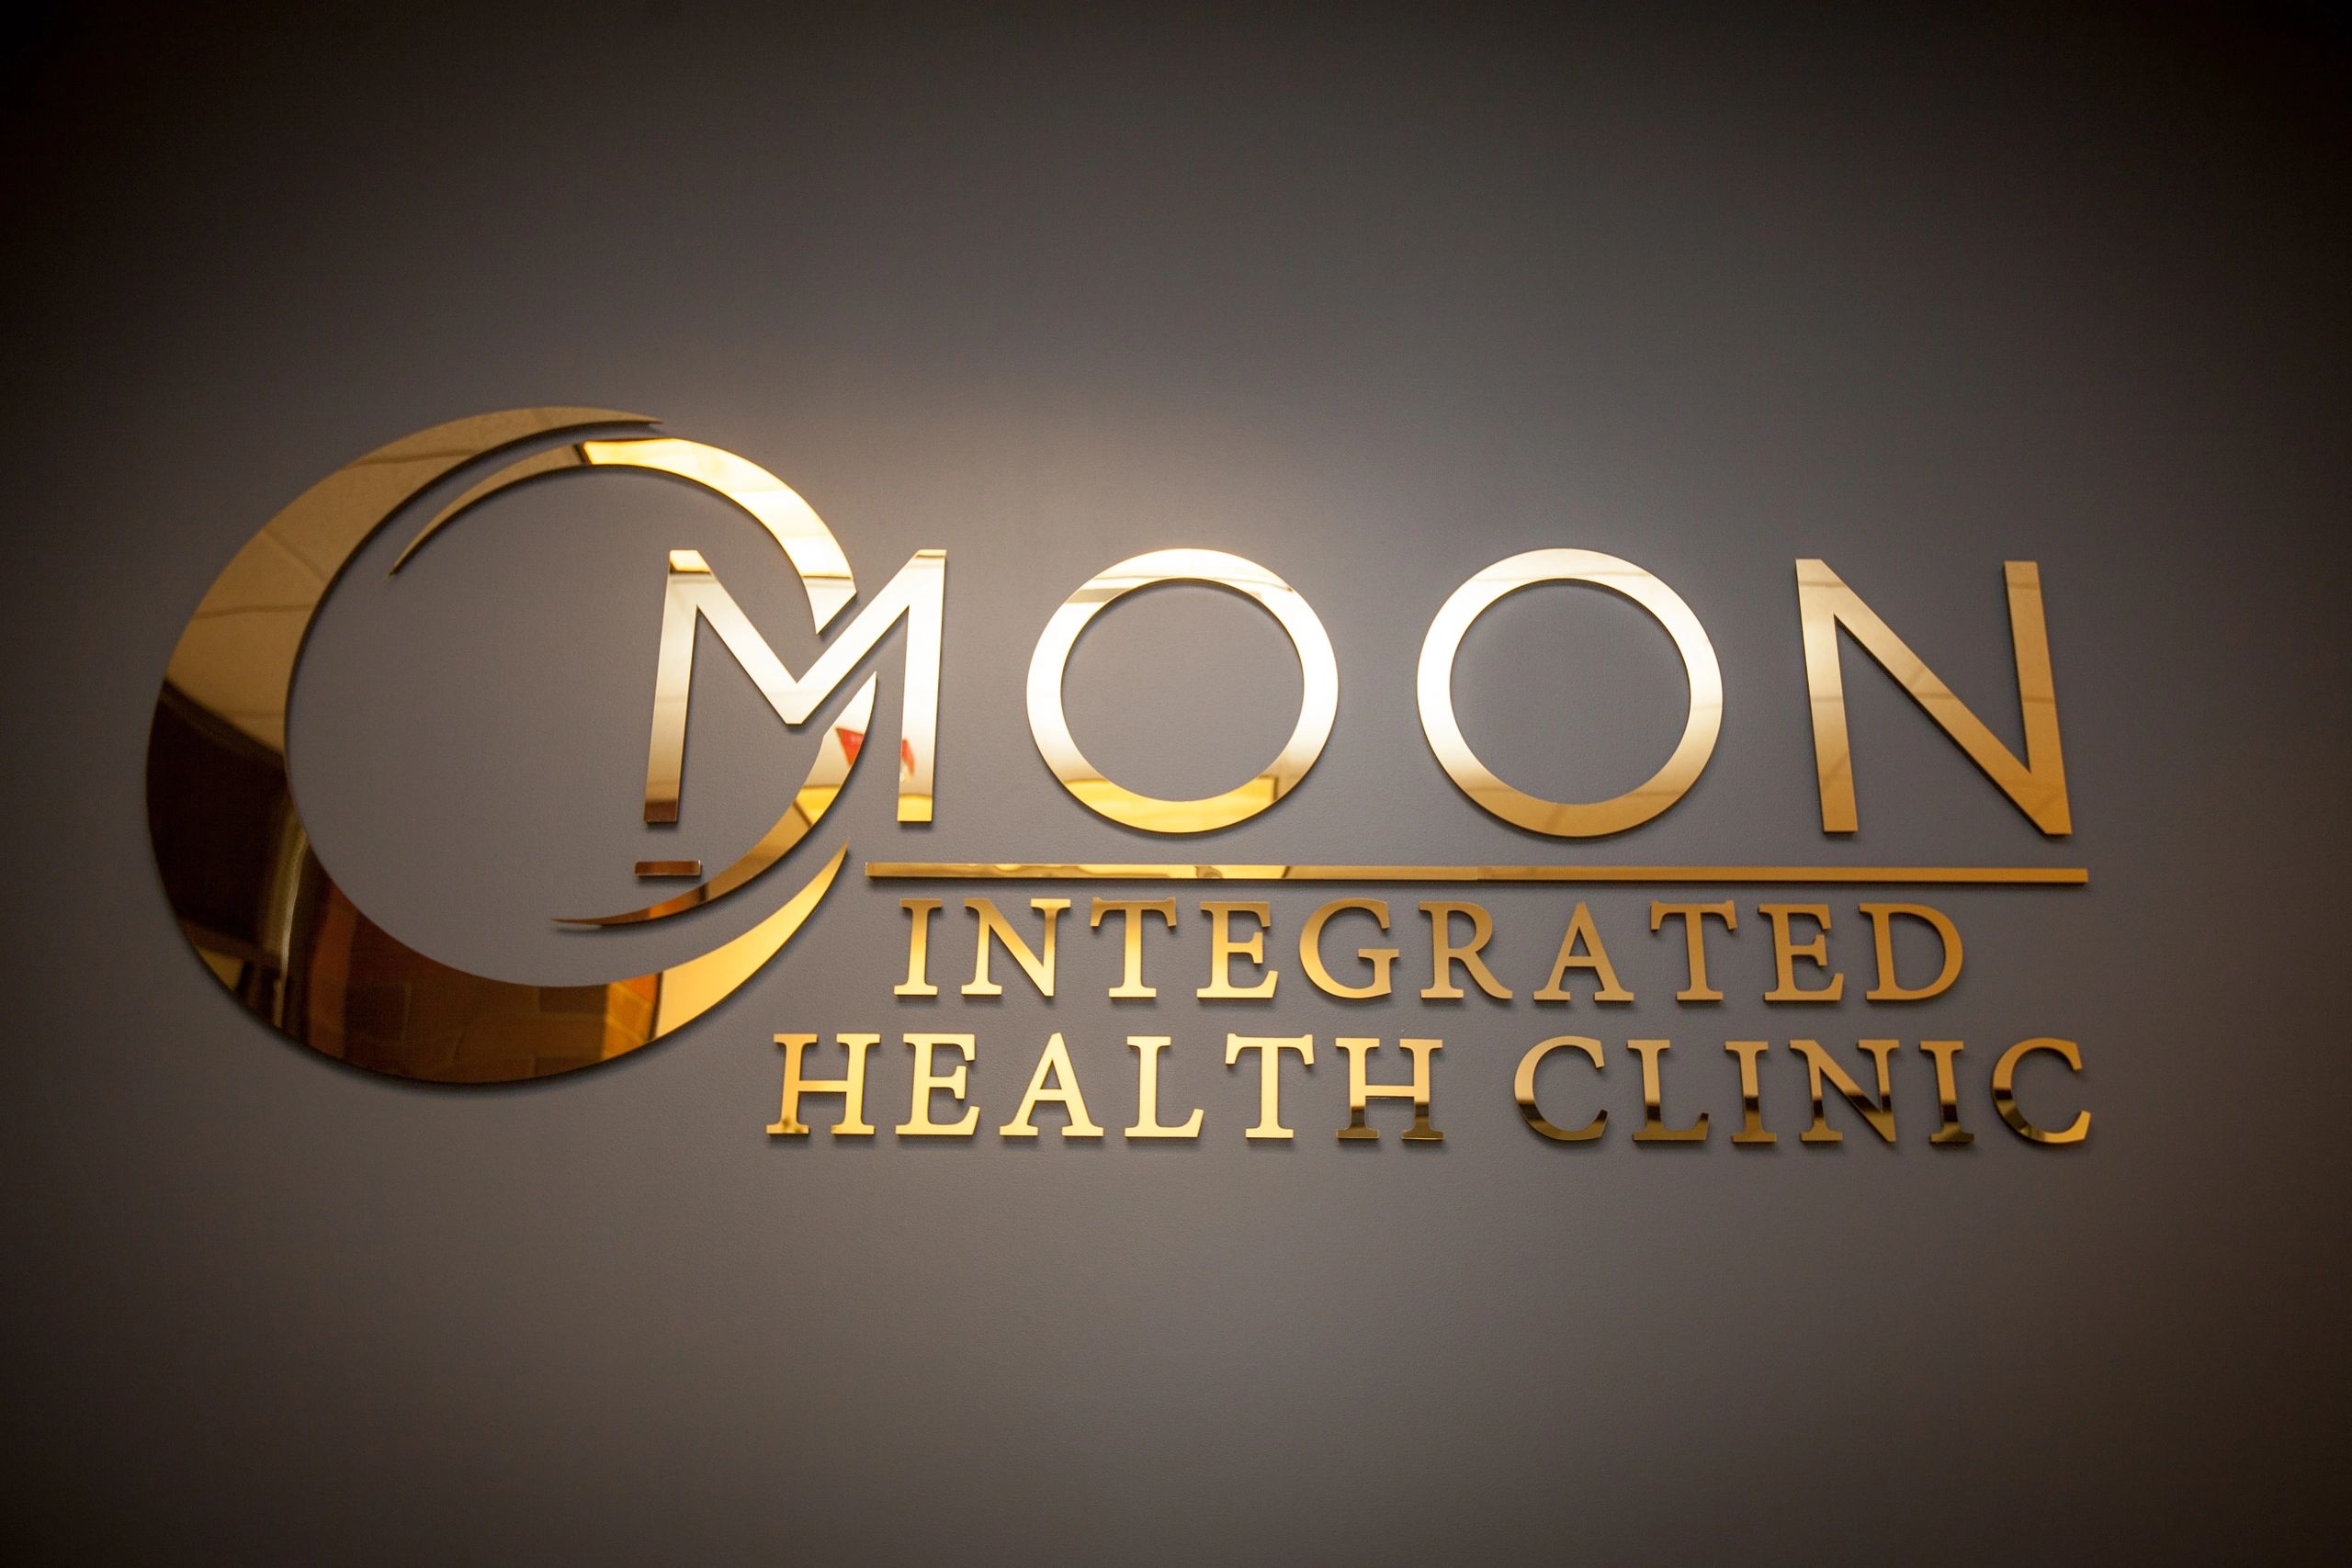 Integrated Health Services Moon Integrated Health Clinic